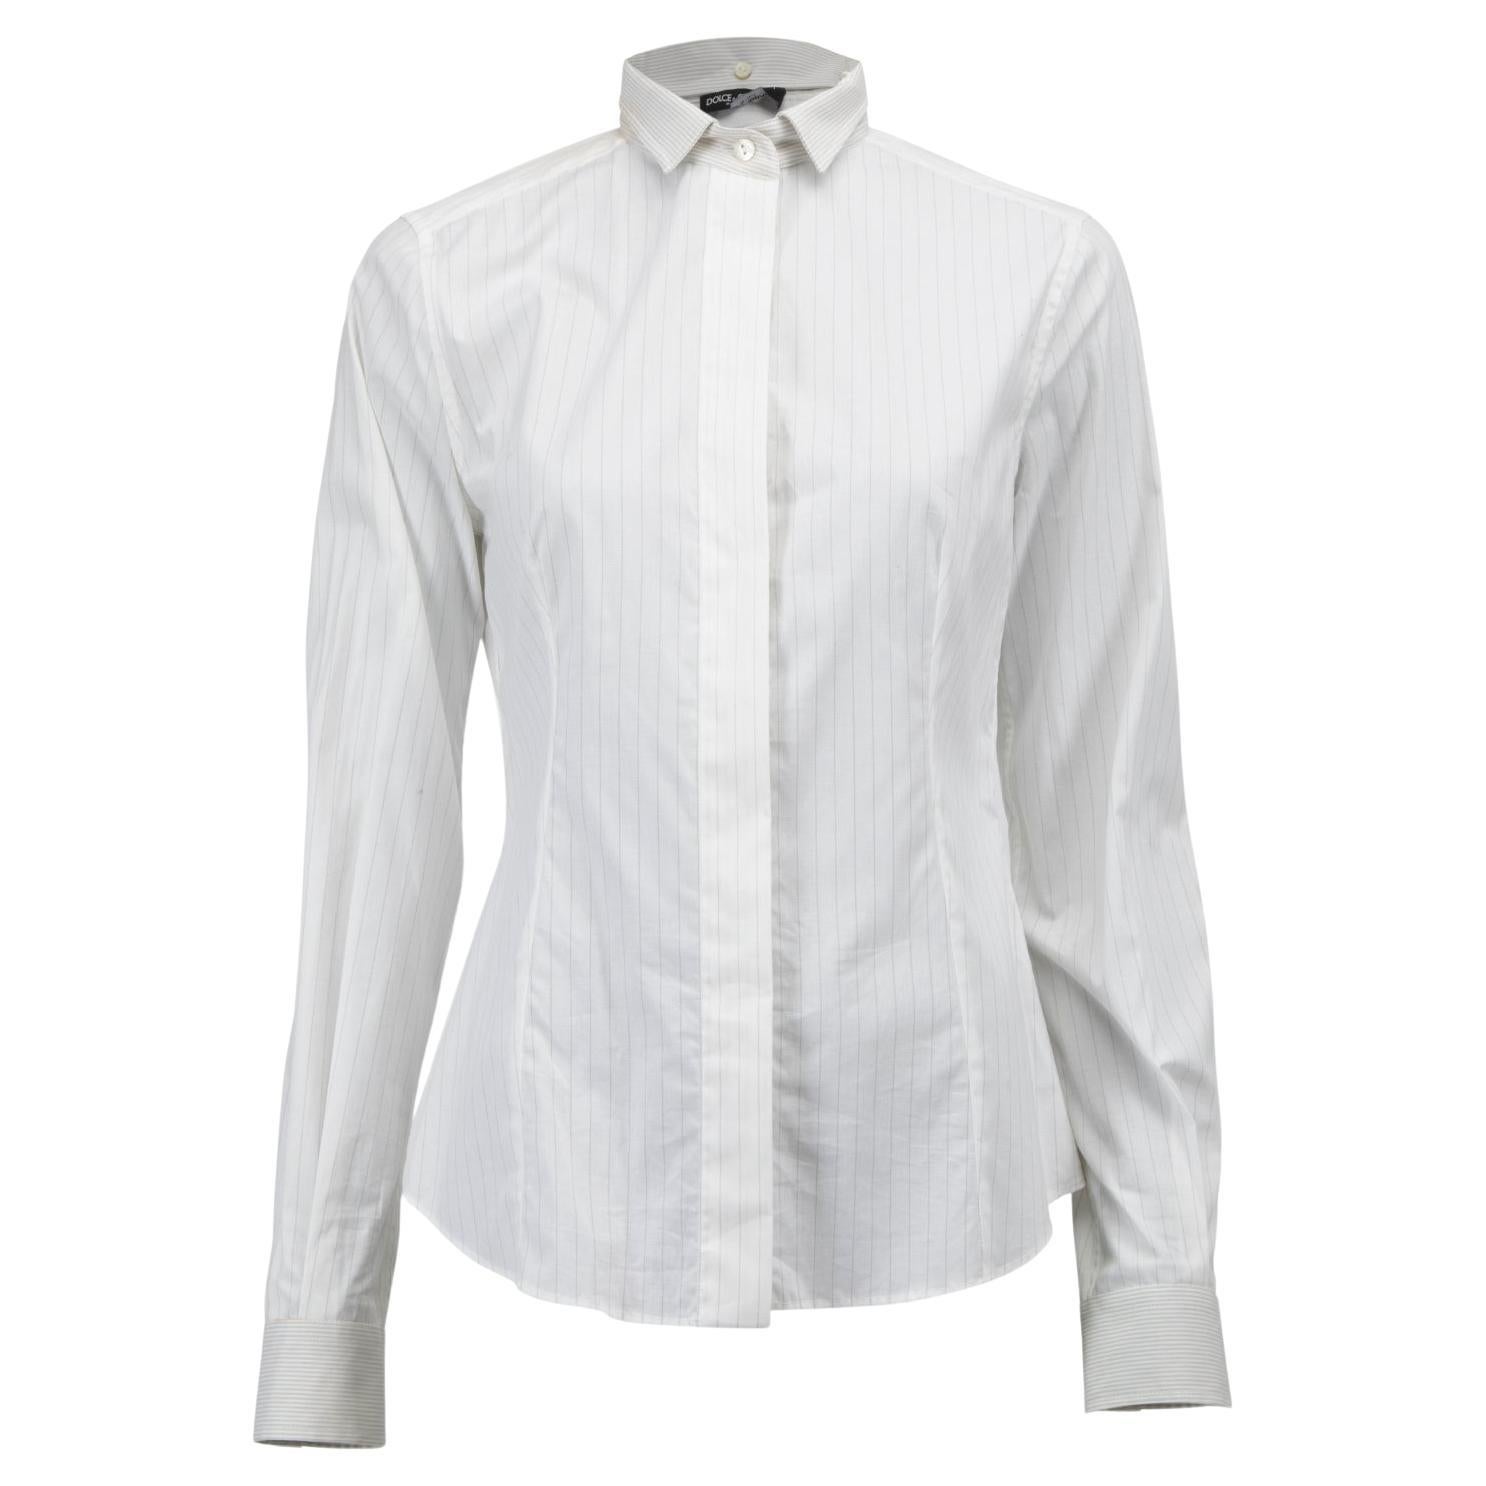 Pre-Loved Dolce & Gabbana Women's White Striped Cotton Shirt with Detachable For Sale